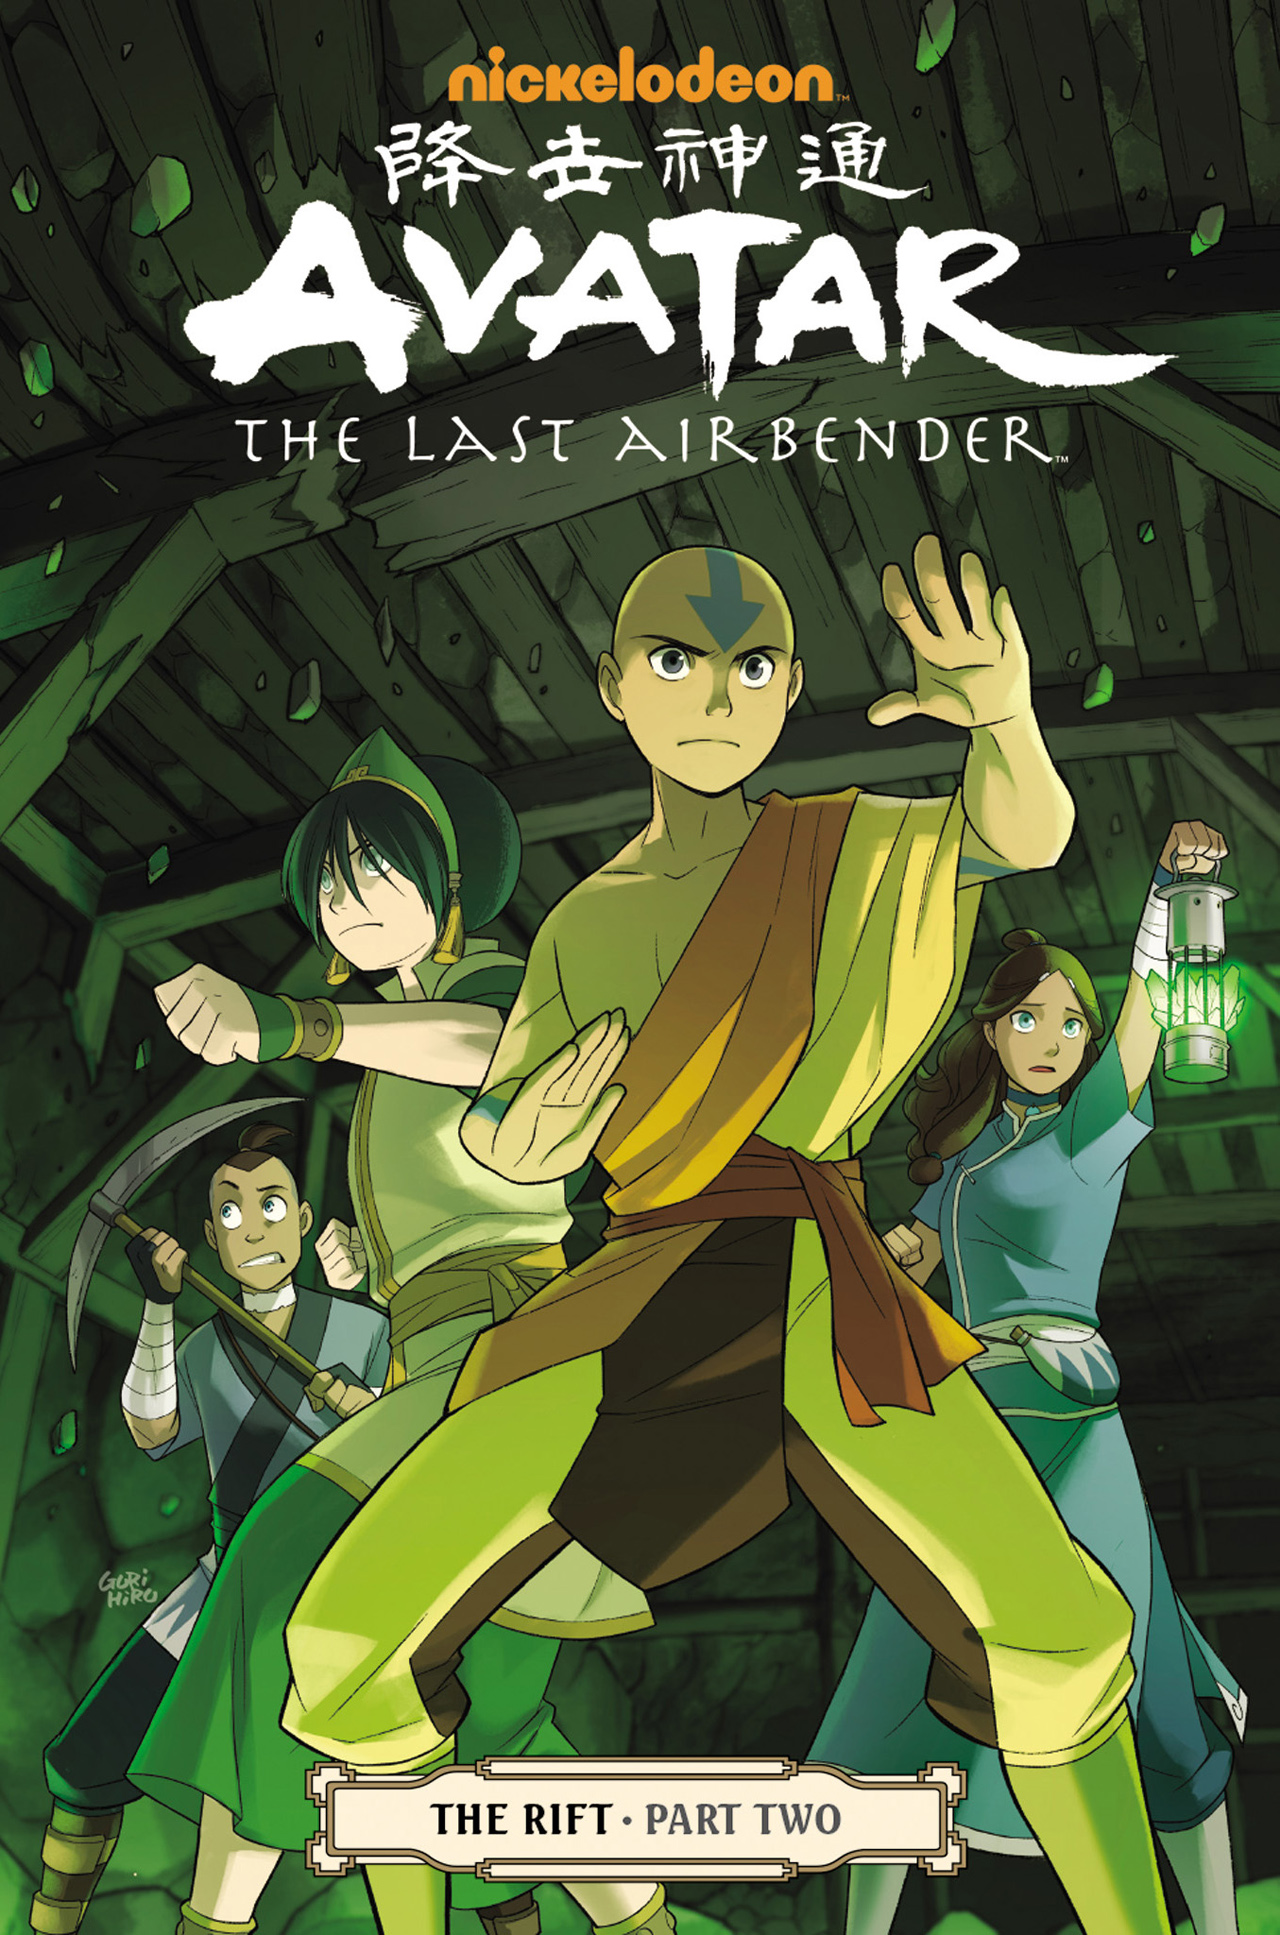 Read online Nickelodeon Avatar: The Last Airbender - The Rift comic -  Issue # Part 2 - 1